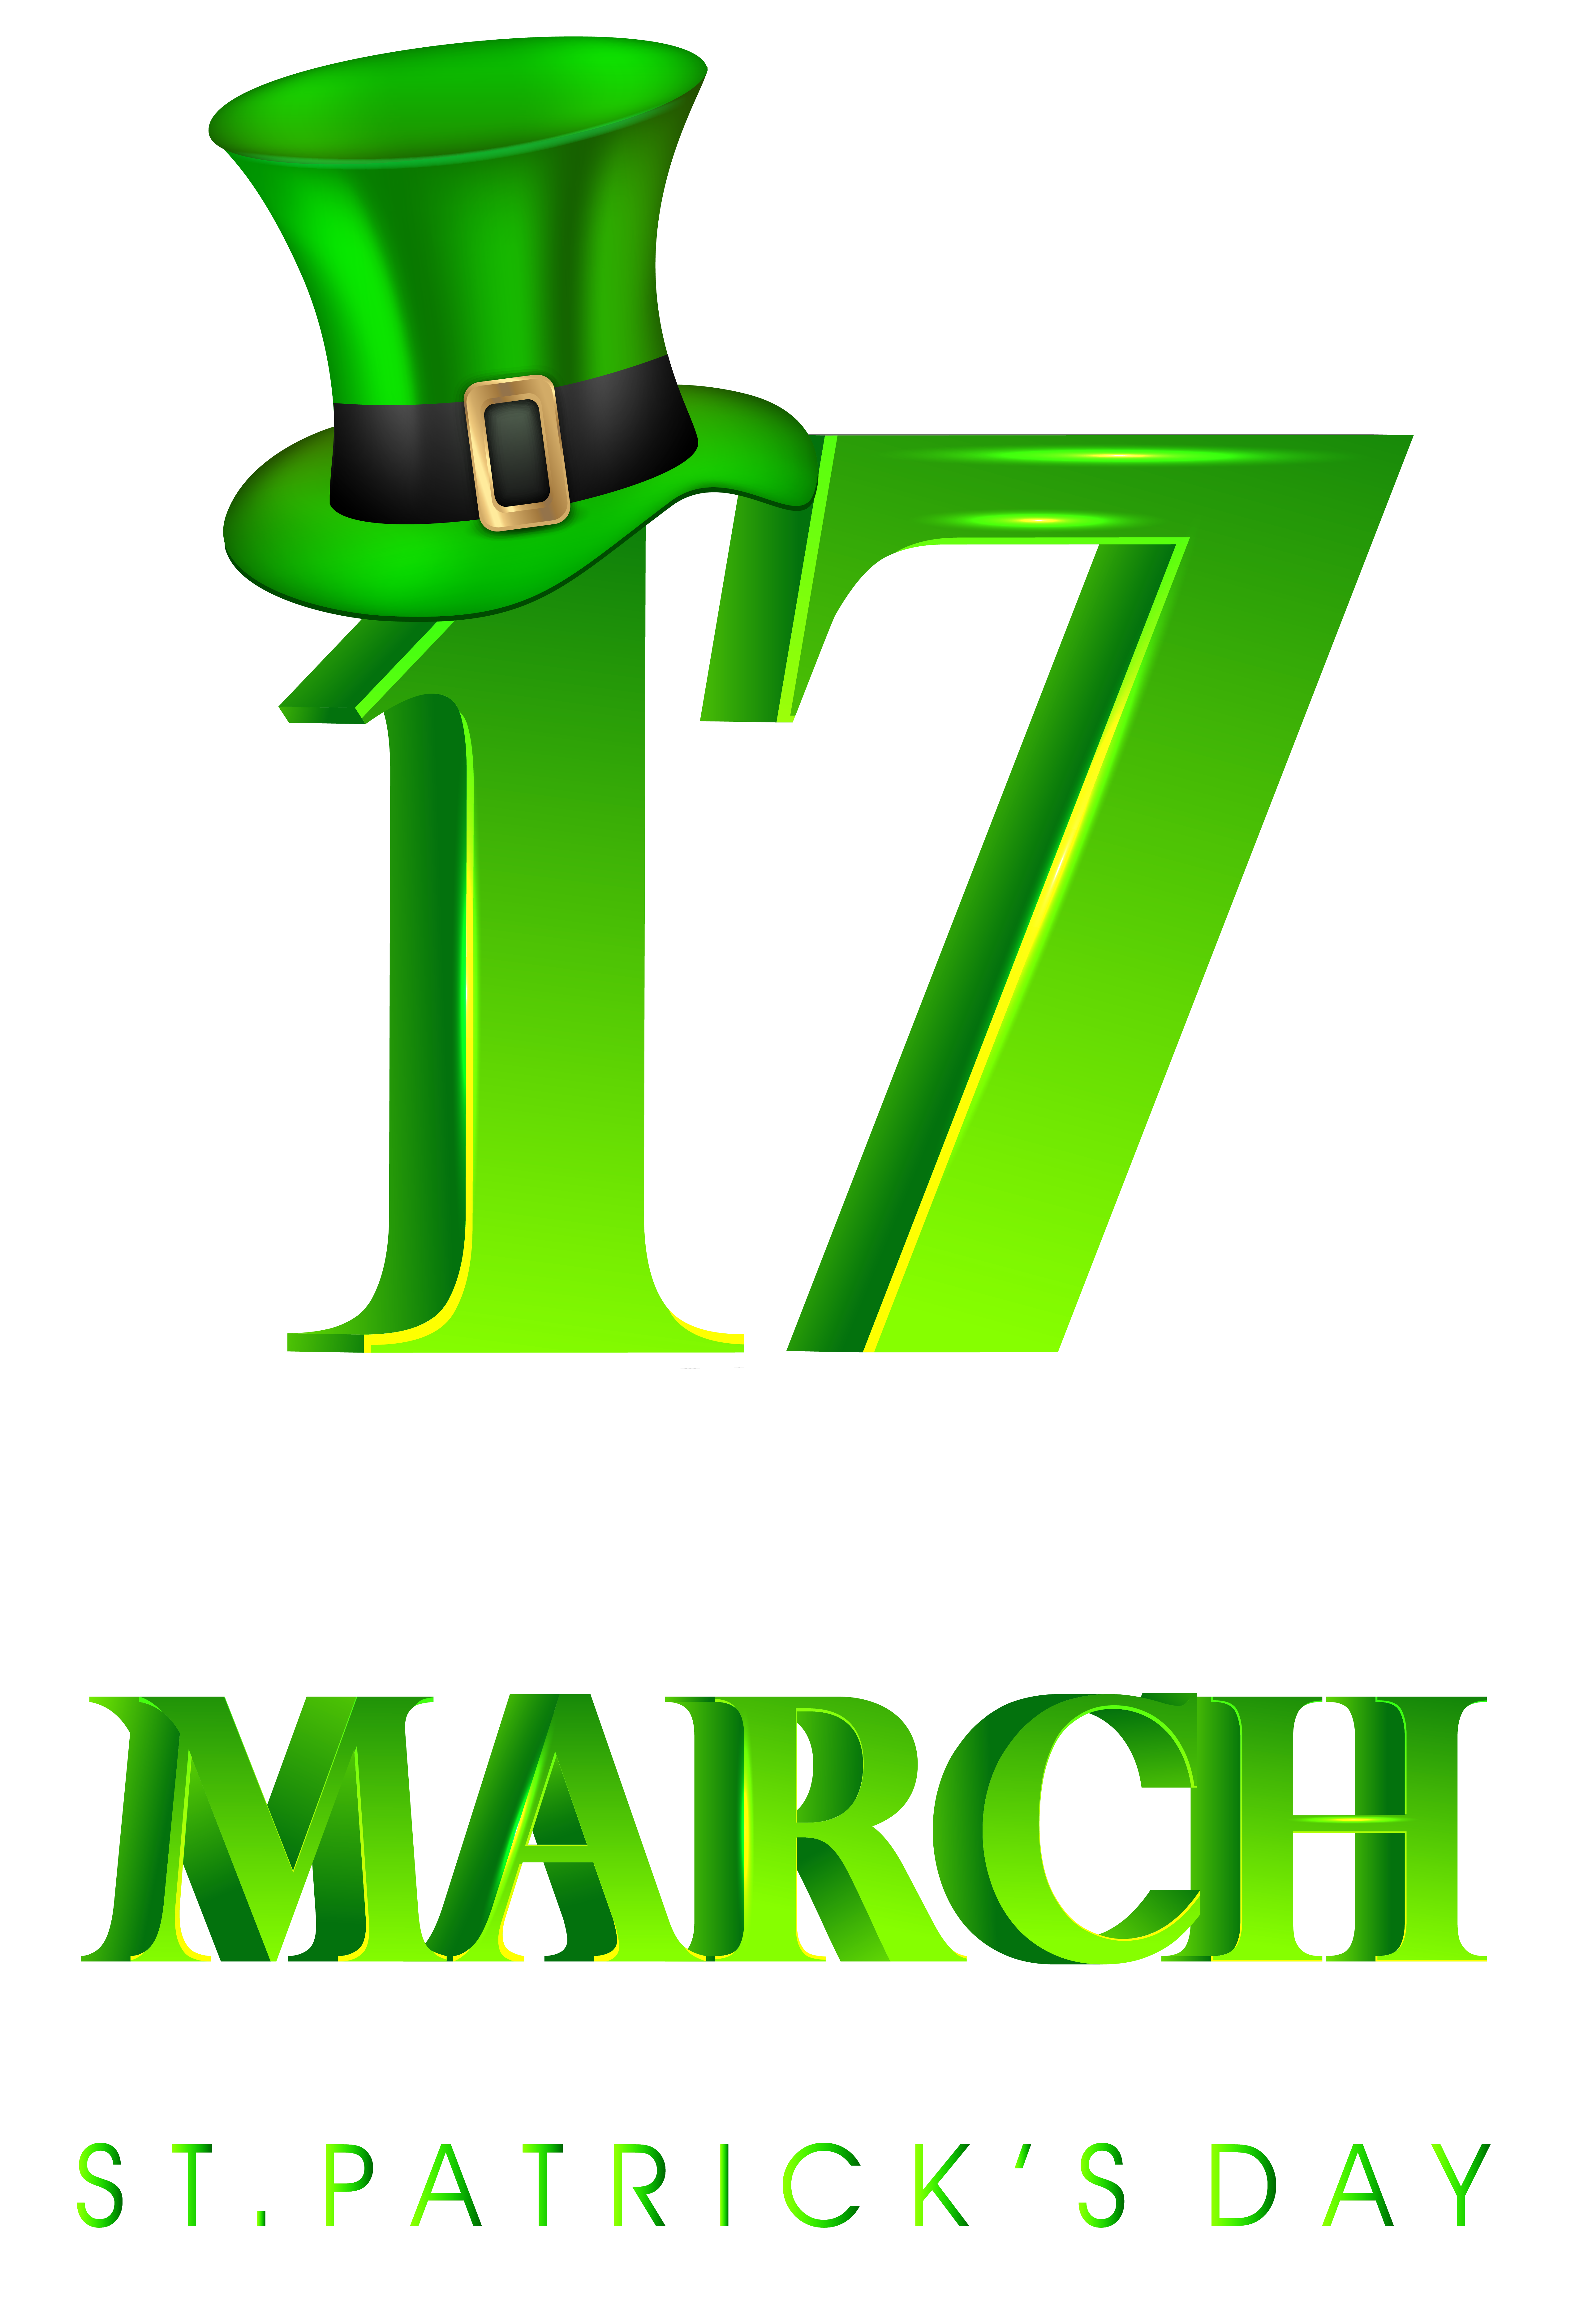 st-patrick-day-clipart-free-download-on-clipartmag